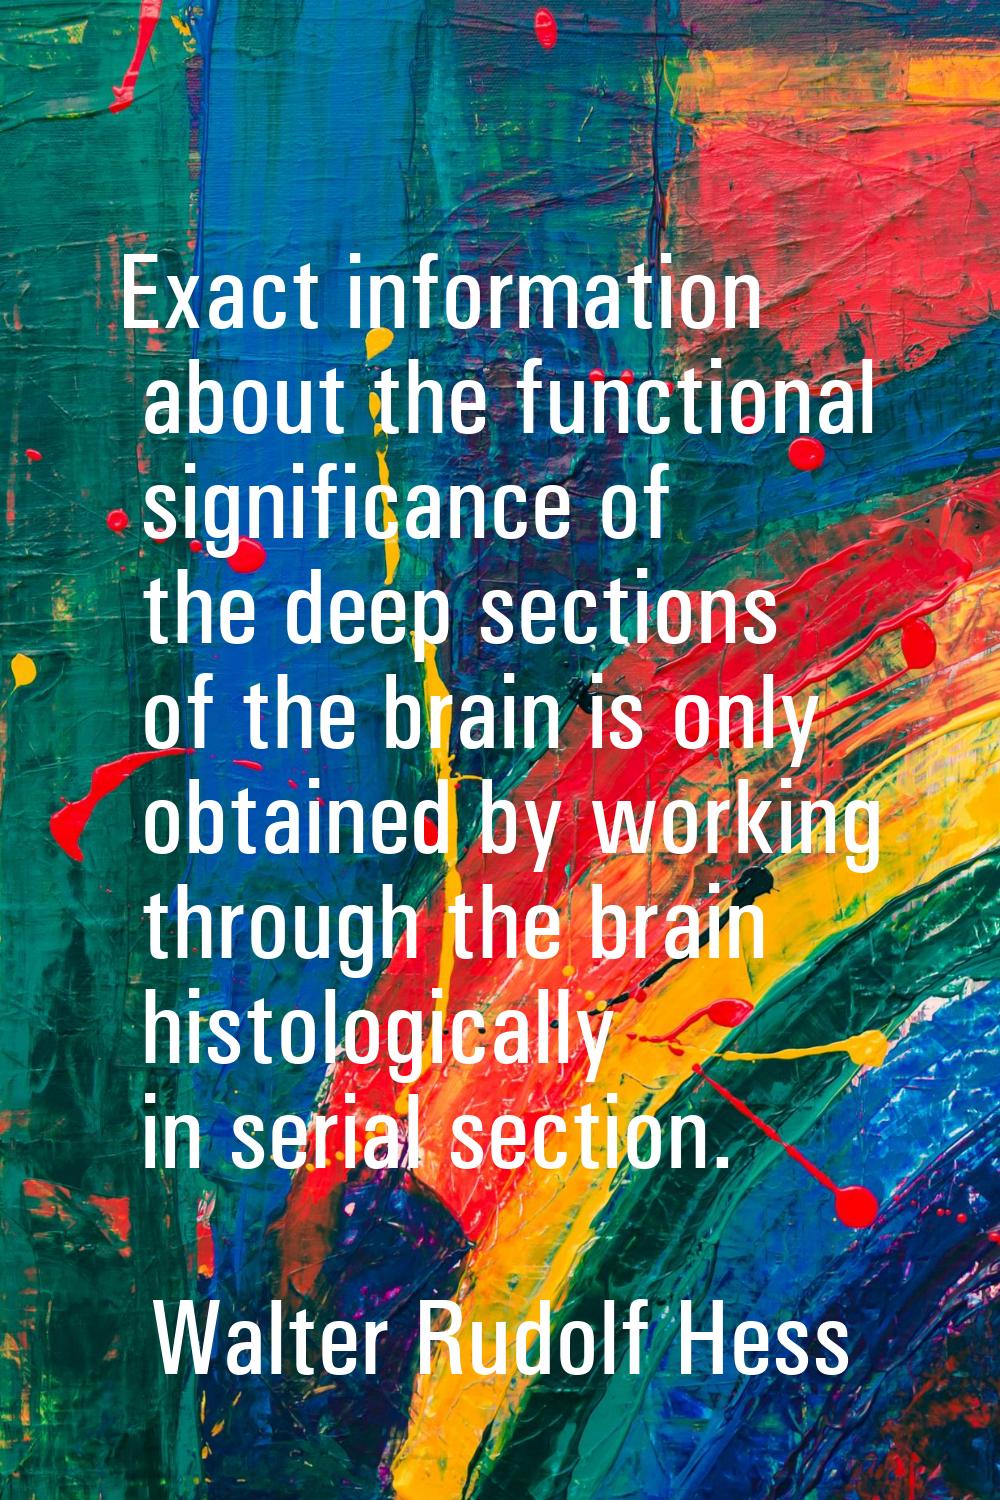 Exact information about the functional significance of the deep sections of the brain is only obtai